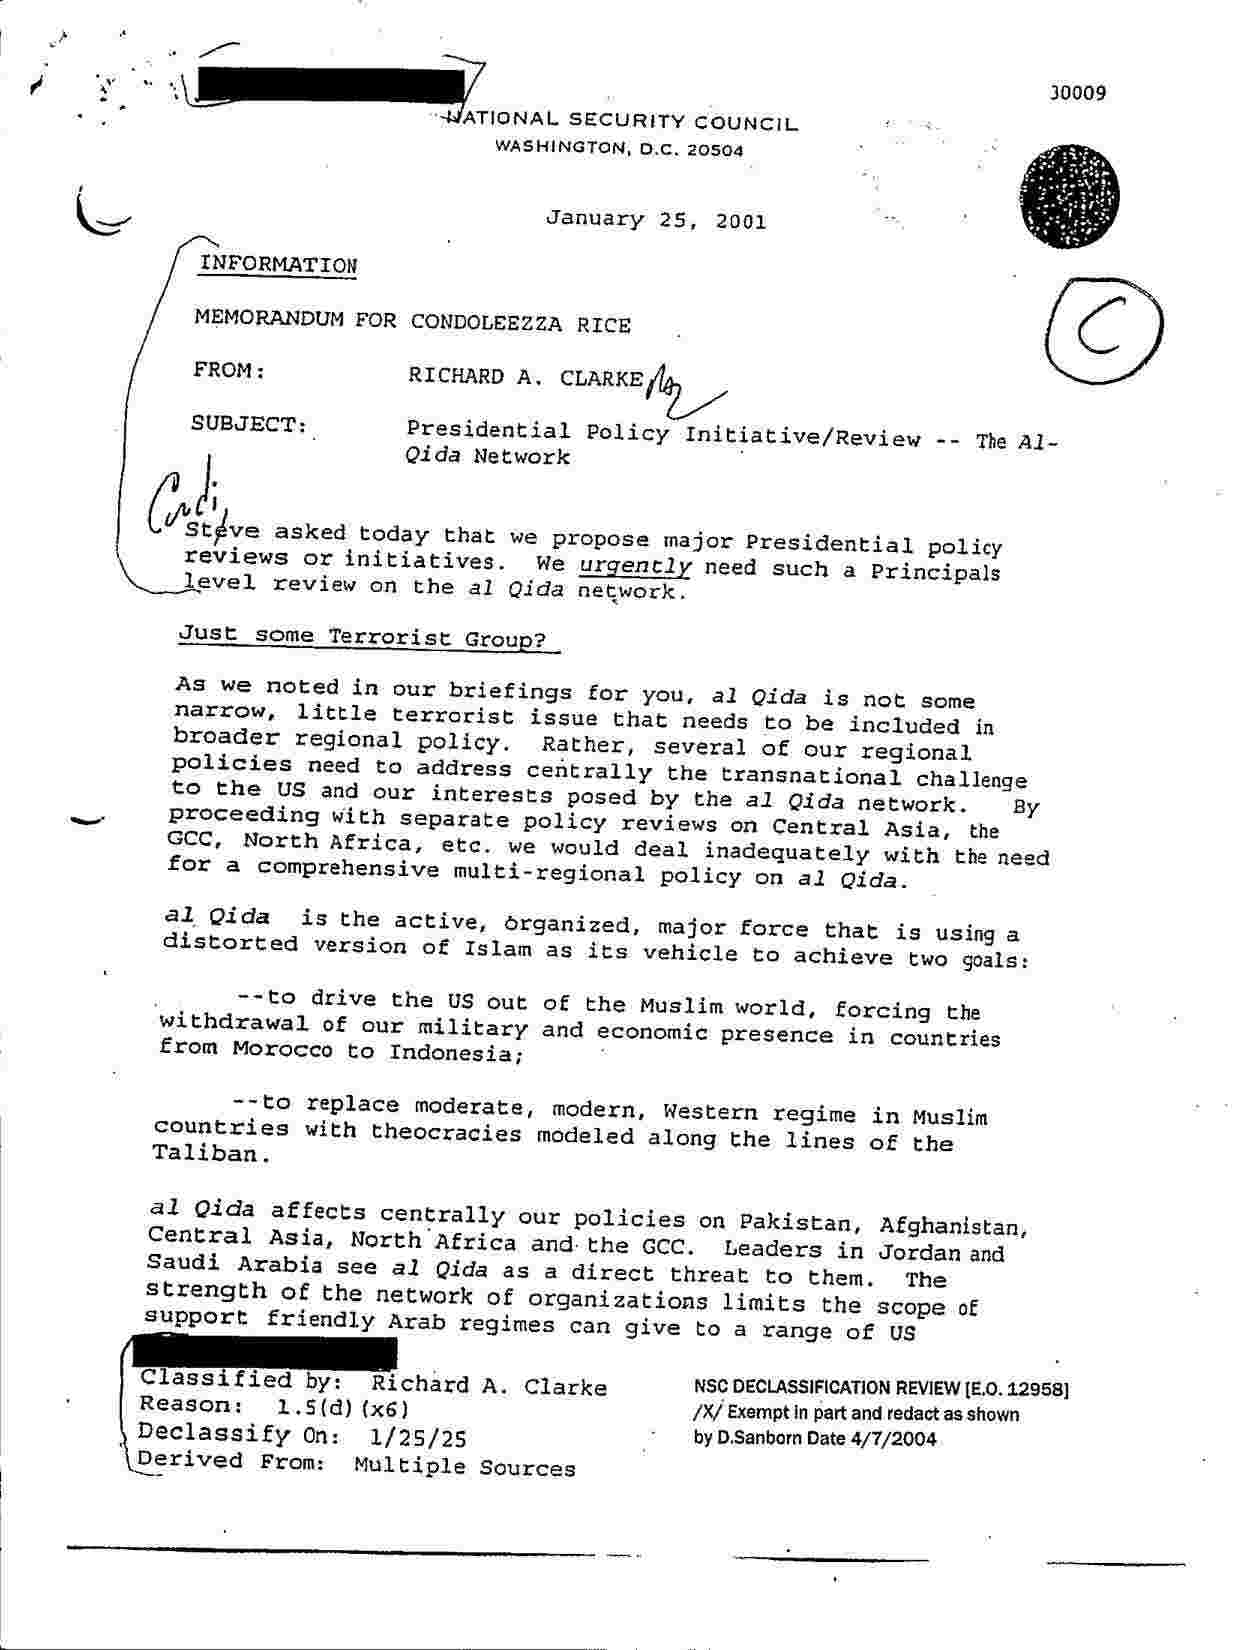 NSC memo page 1